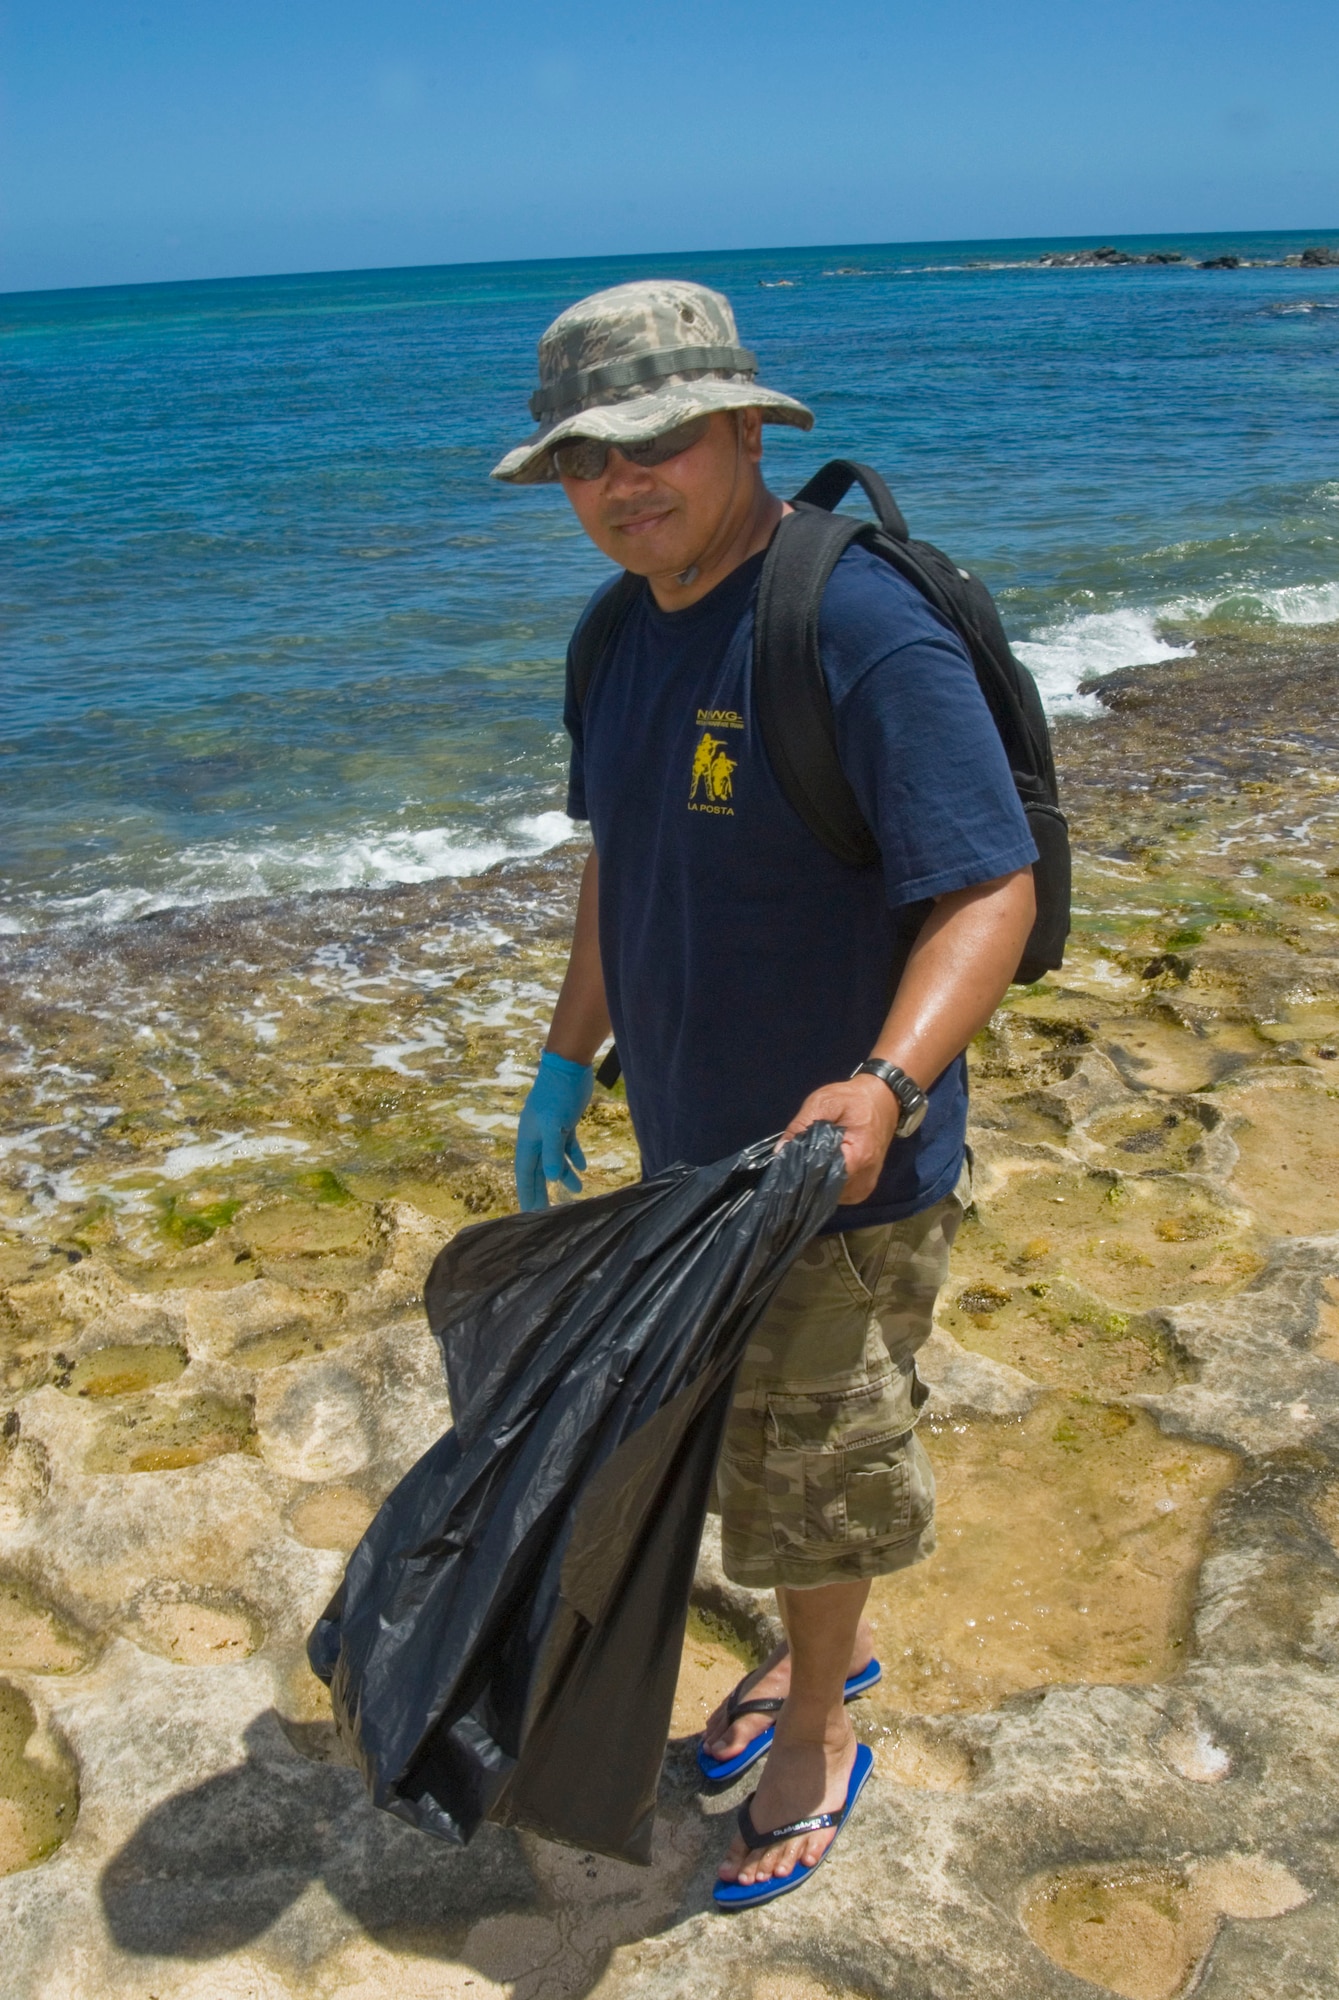 Tech. Sgt. Gil Vicente helps pick up trash at Laniakea Beach on Oahu’s North Shore June 11, 2010. The 146th AW Civil Engineering Squadron participated in the project alongside the organization “Malama nu Honu,” a non-profit group that works to protect the Hawaiian Green Sea Turtle through education, public awareness and conservation. (DoD photo by Airman 1st Class Nicholas Carzis, U.S. Air Force/Released)